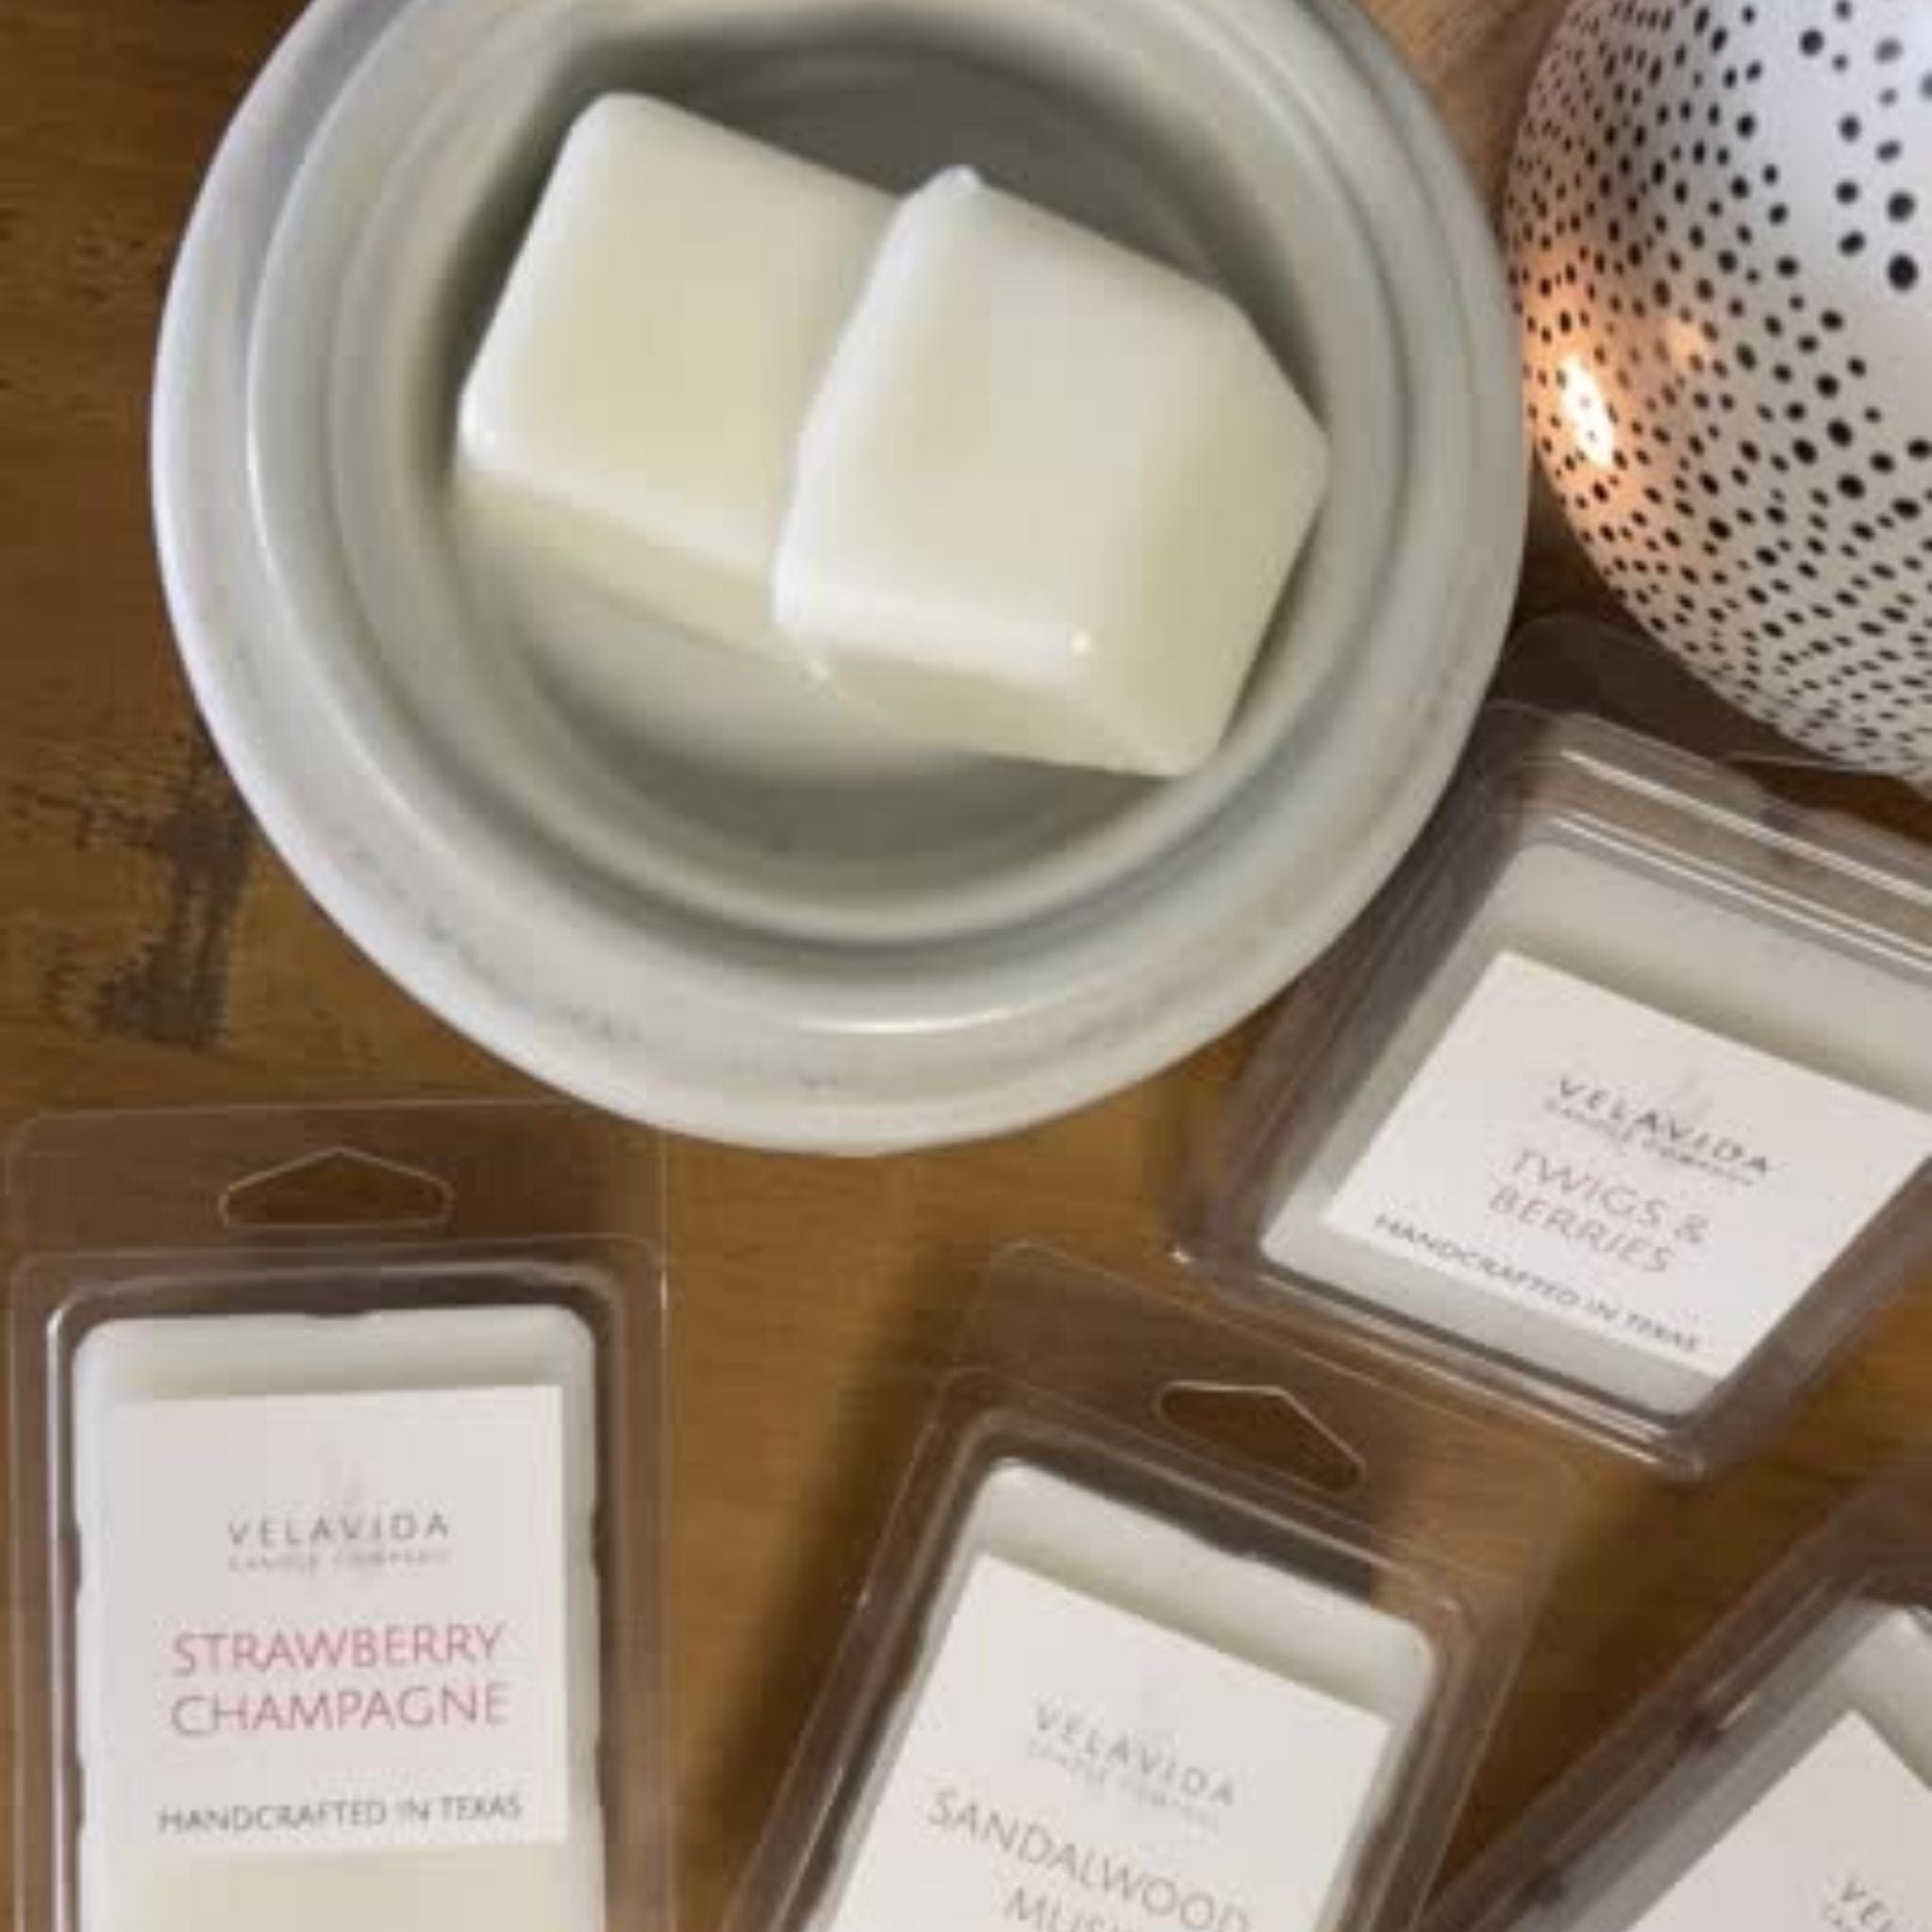 Velavida Candle Key Lime Pie Scented Wax Melts